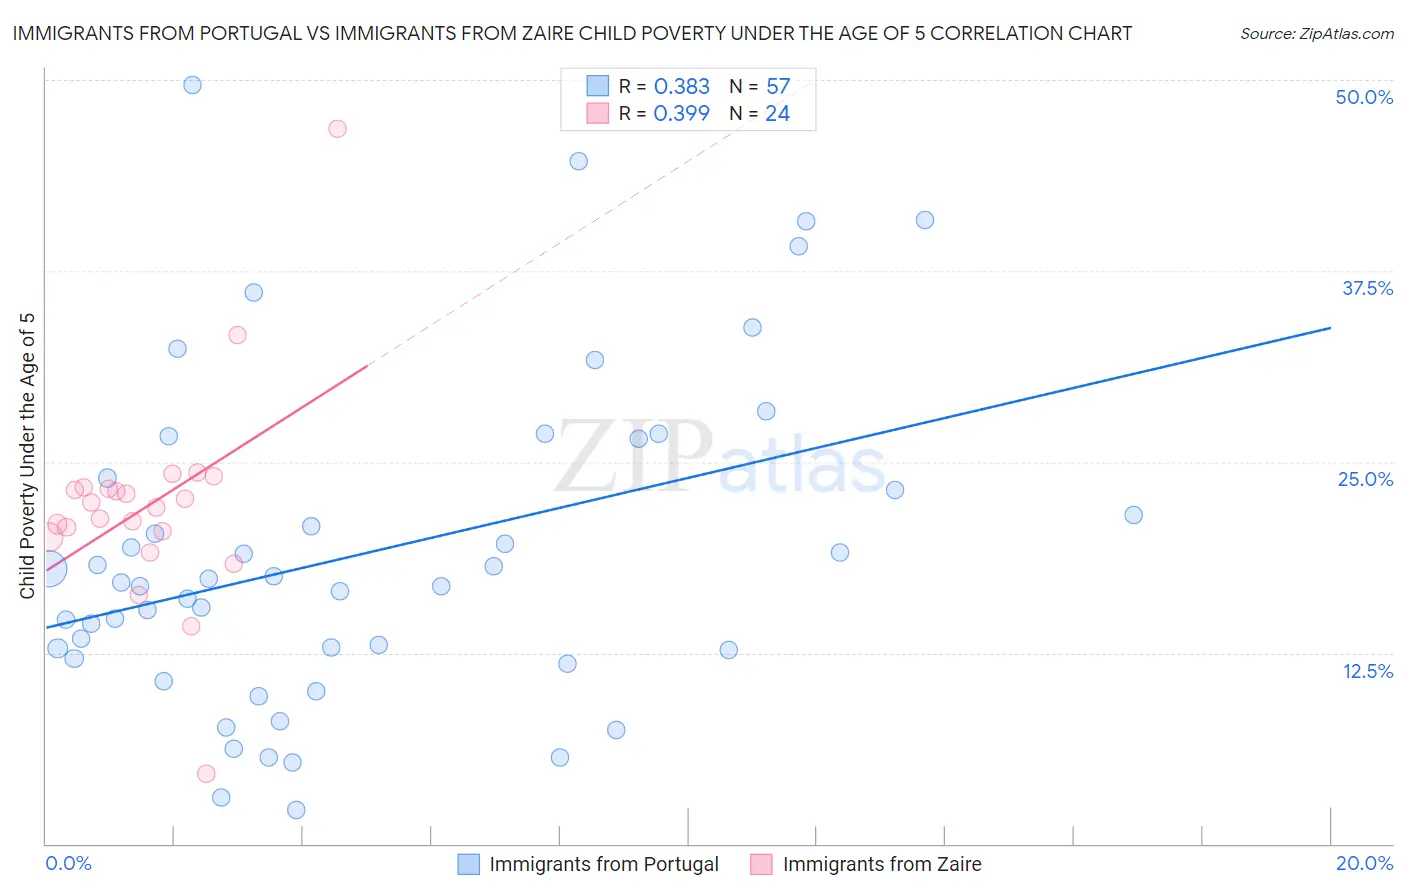 Immigrants from Portugal vs Immigrants from Zaire Child Poverty Under the Age of 5